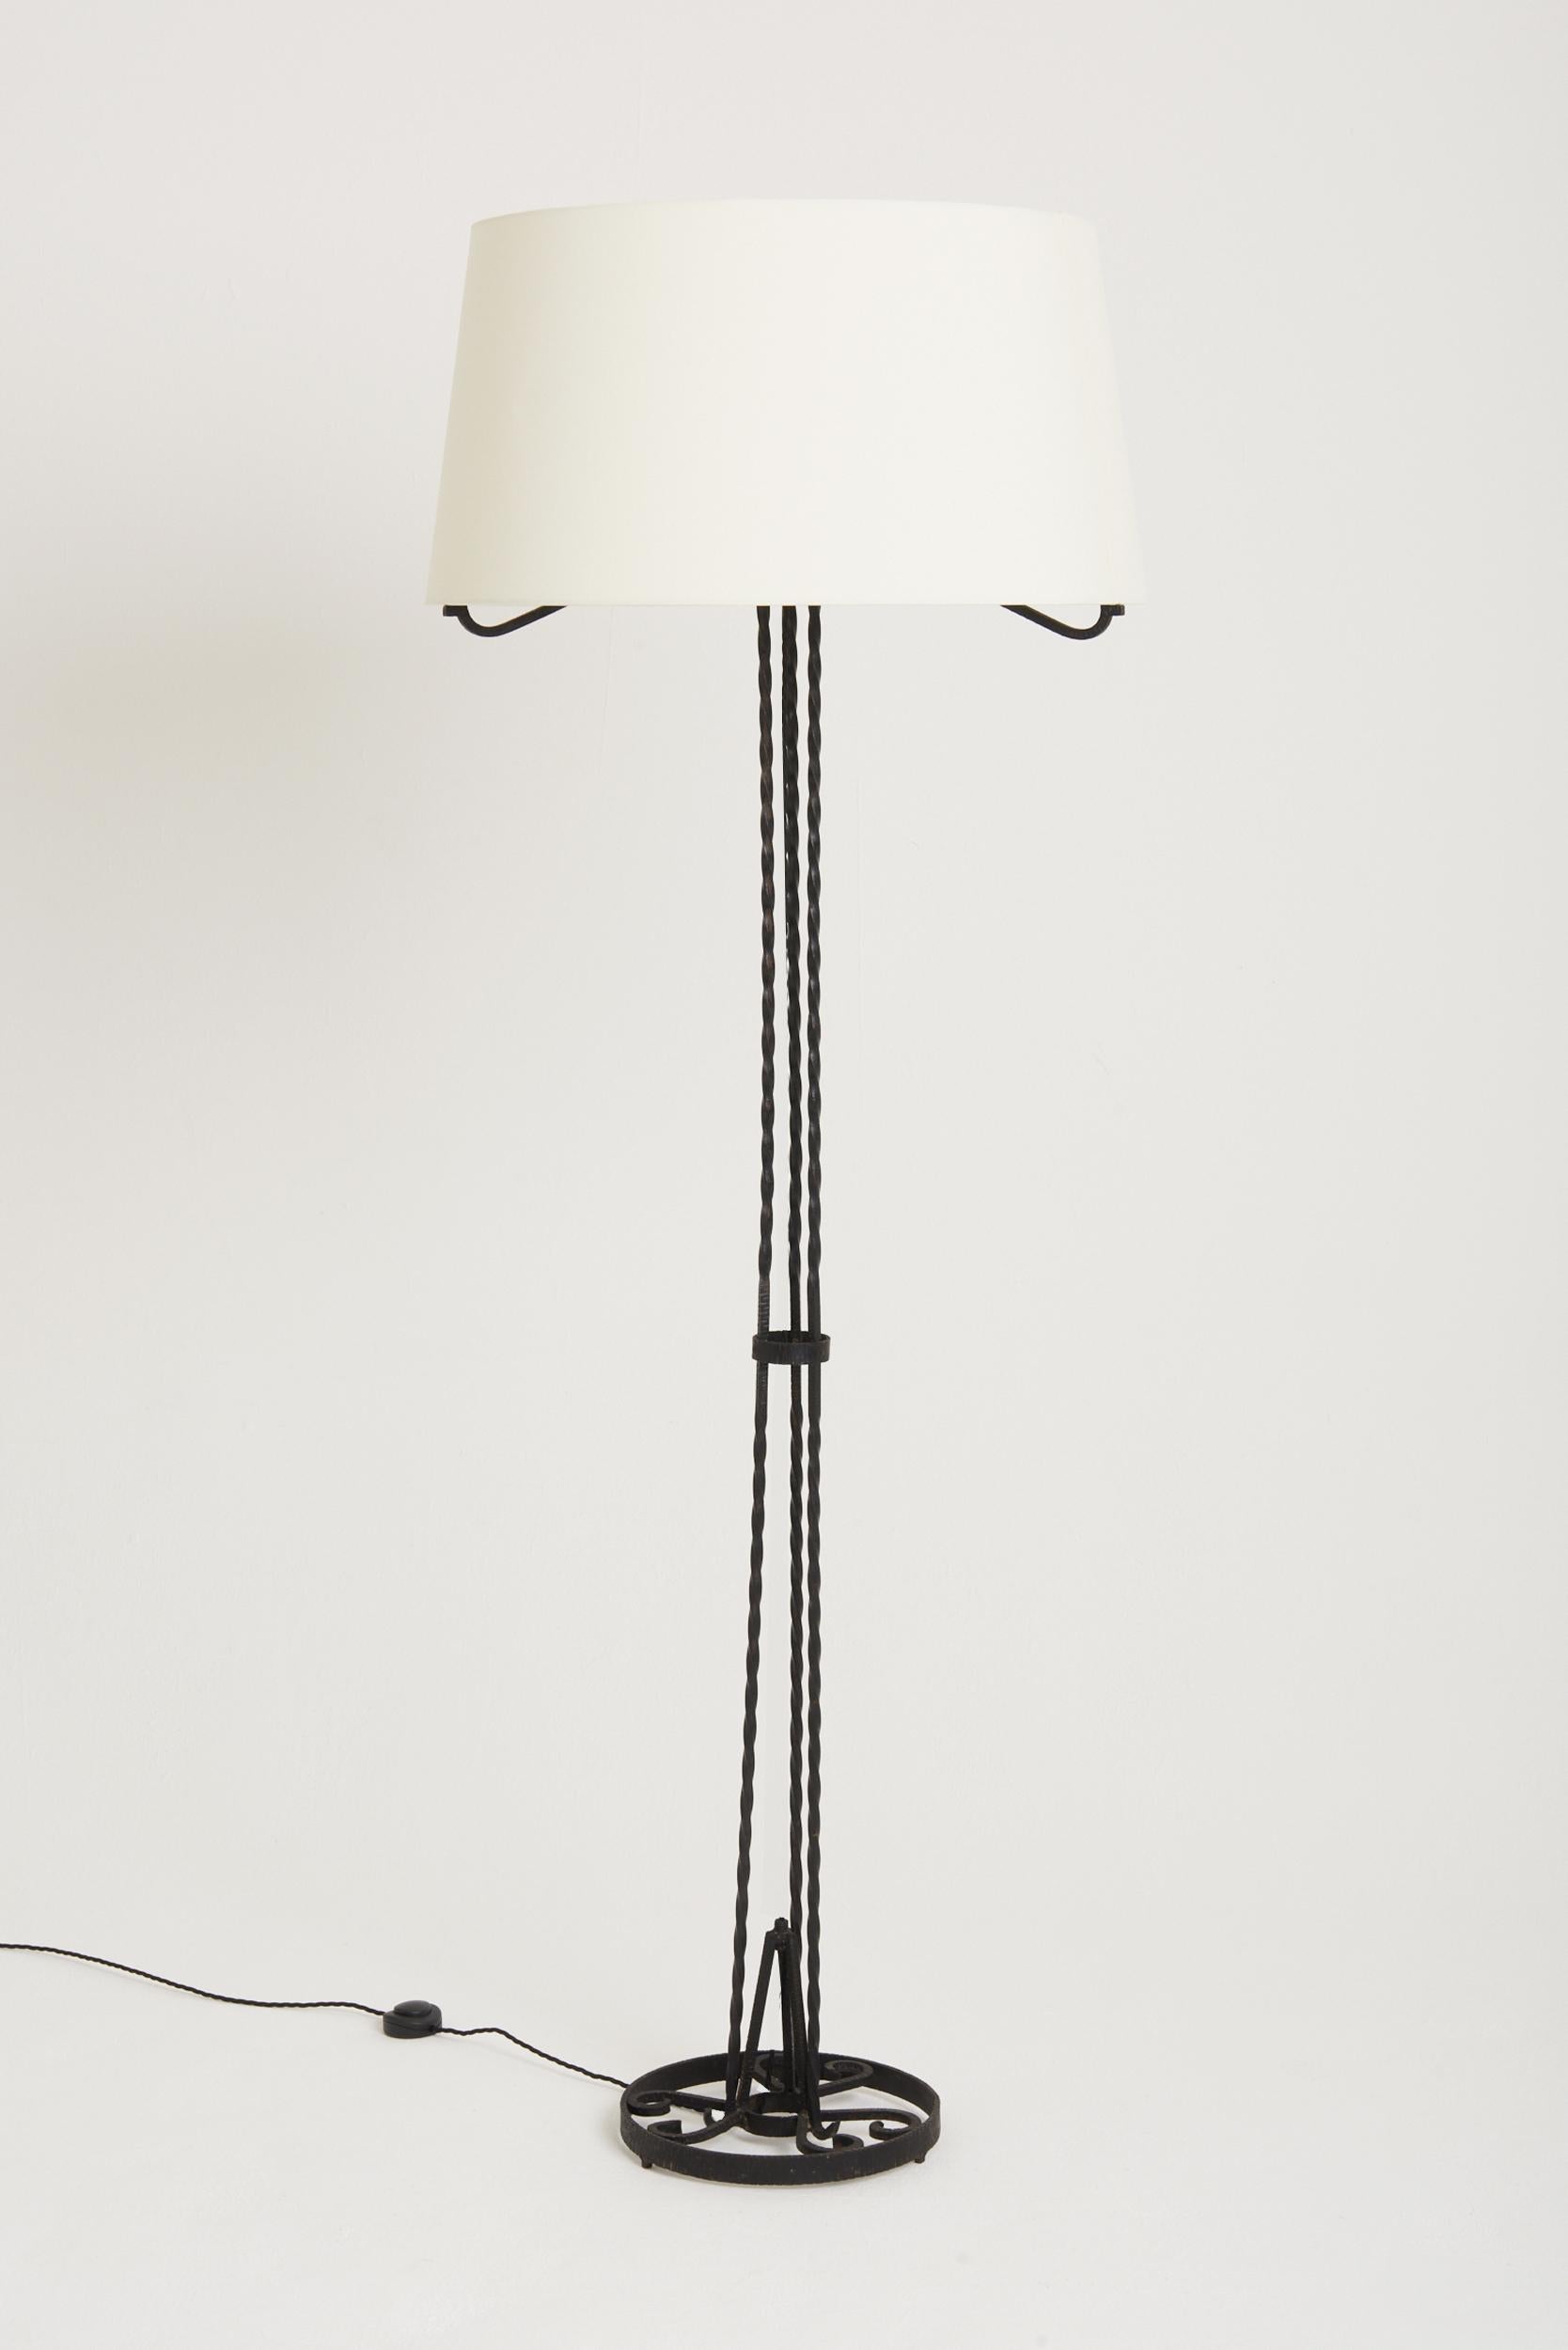 An Art Deco tall wrought iron floor lamp. With its original shade recovered in new off white fabric.
France, Circa 1925.
 